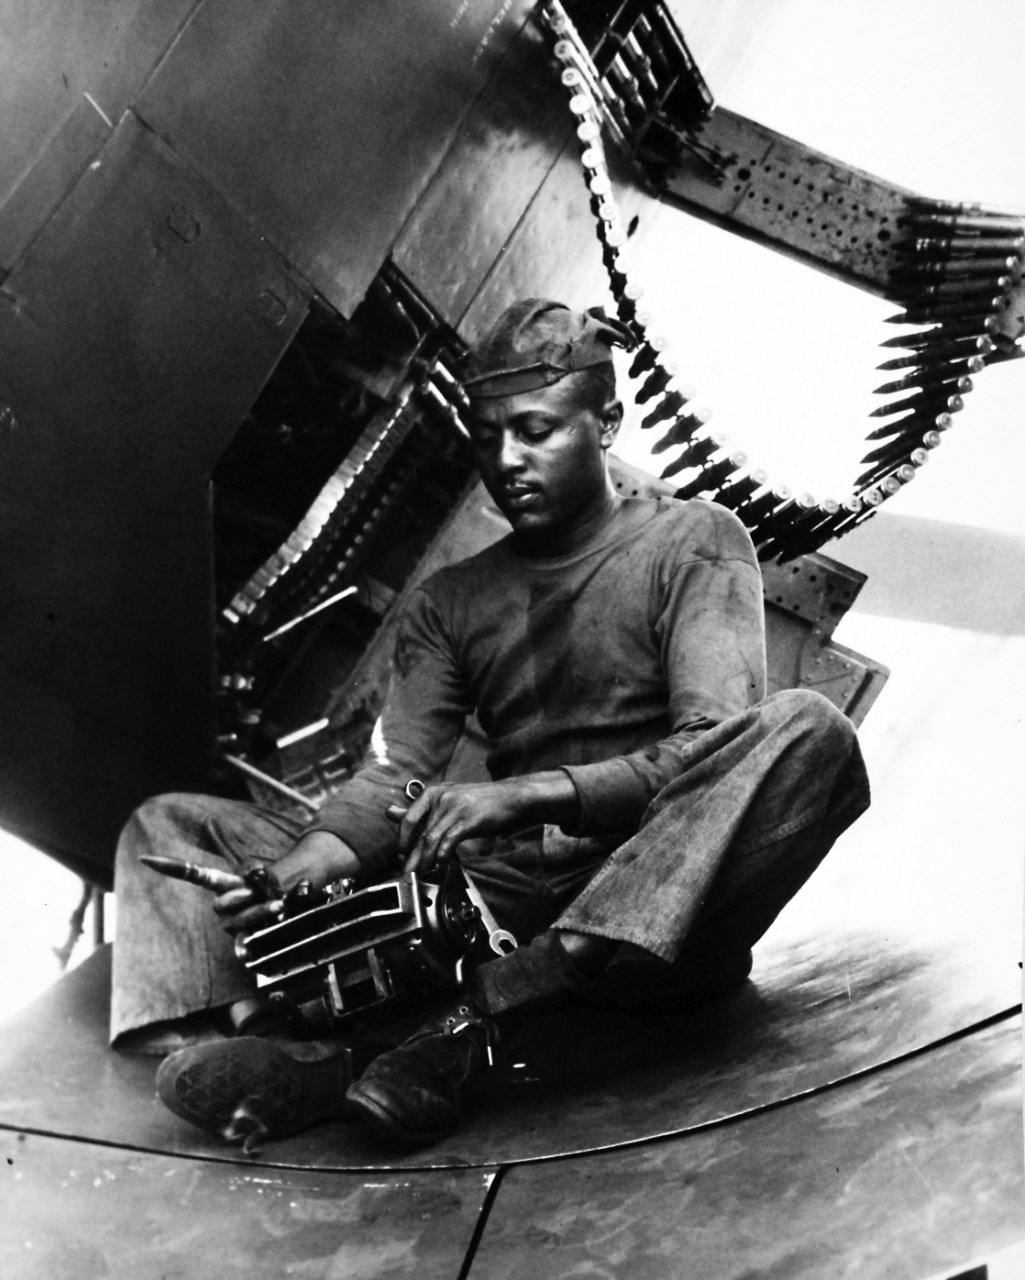 80-G-431465:  Aviation Ordanceman Airman Joseph L. Jones, July 1951.   USS Midway (CVB-41) at sea. Jones is arming an F4U-5.   Photographed by PH3/C J.L. Goss, July 6, 1951.  U.S. Navy Photograph, now in the collections of the National Archives.  